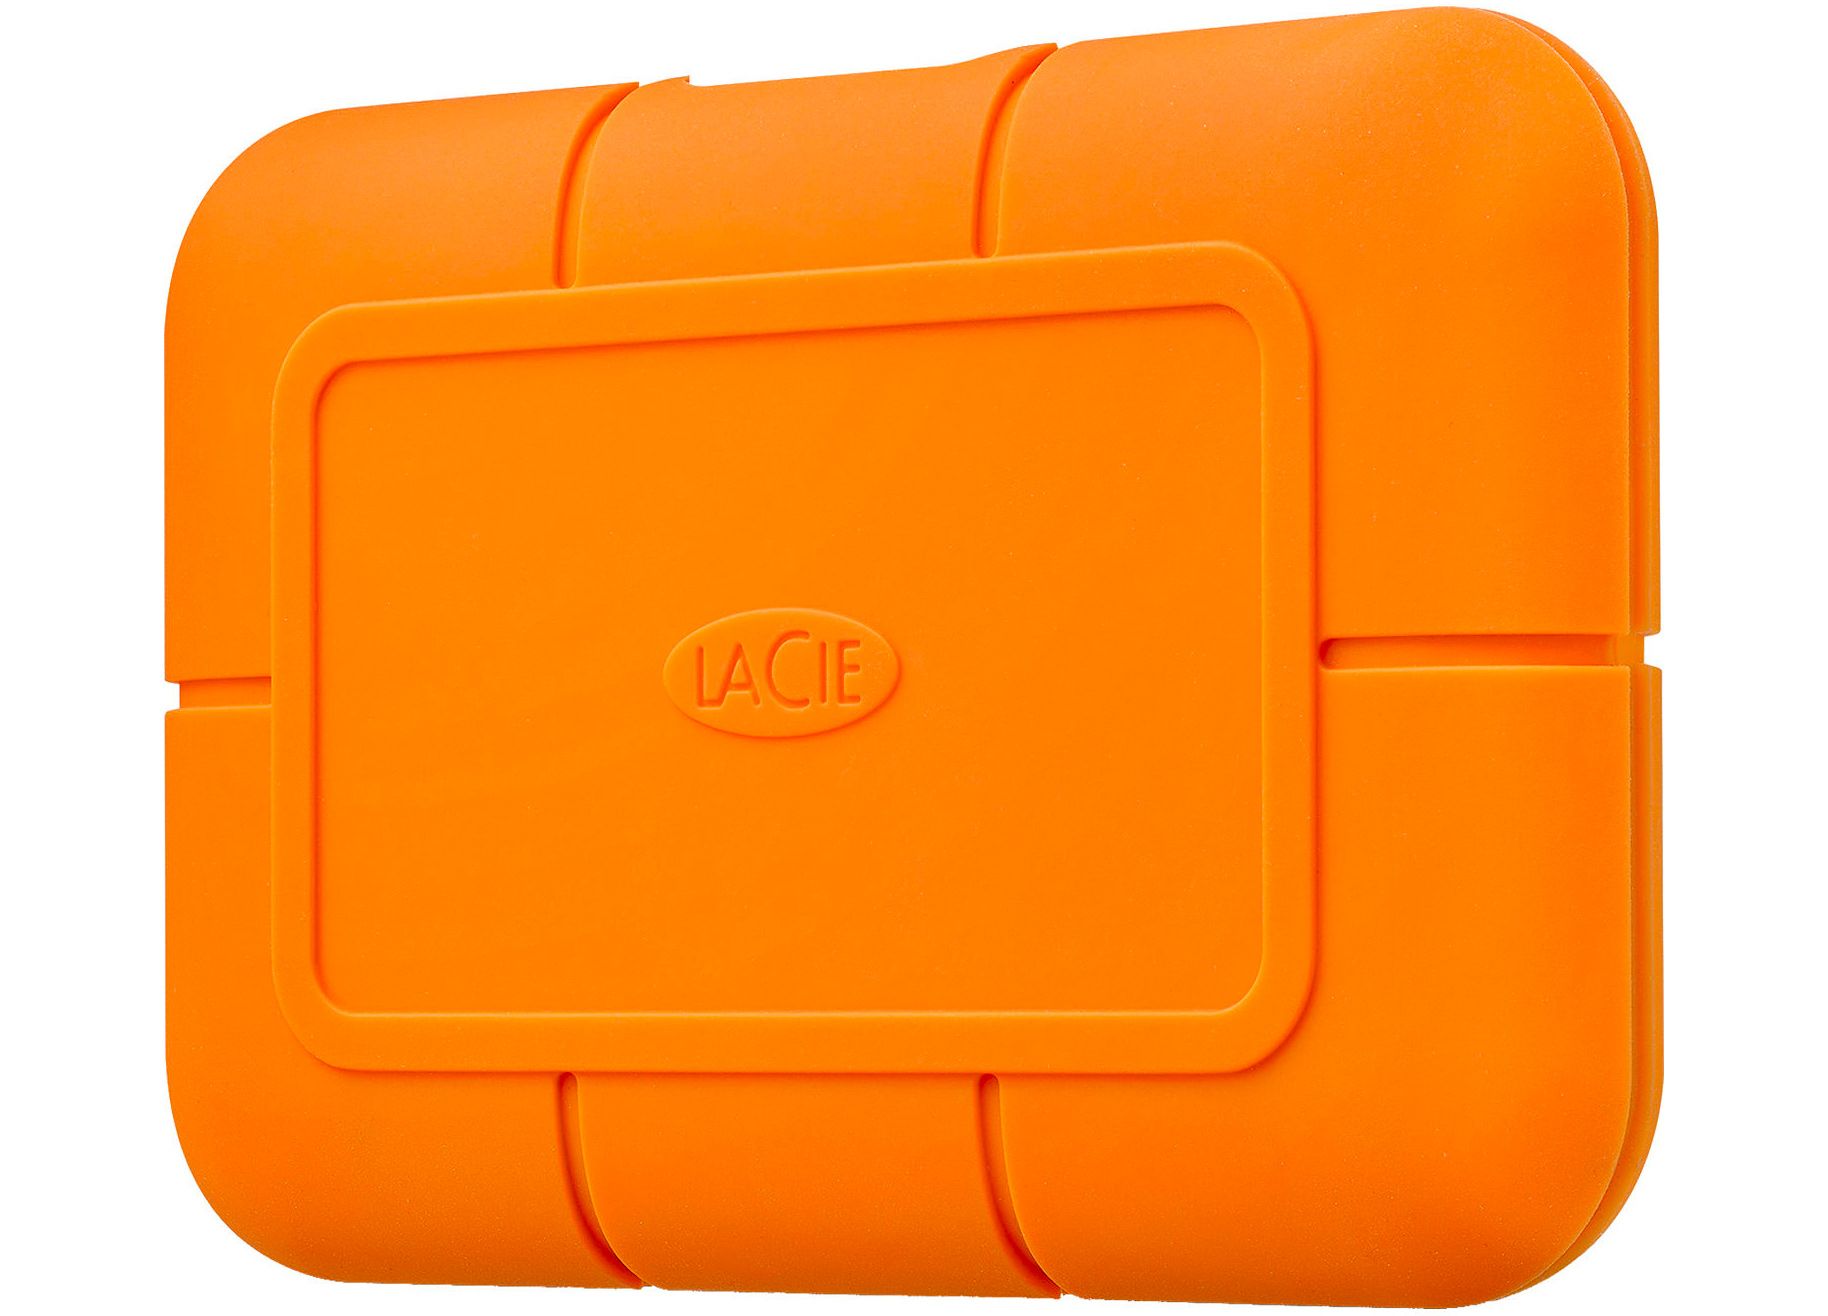 LaCie - Disque dur externe Rugged SSD 500GB USB 3.1 Type-C